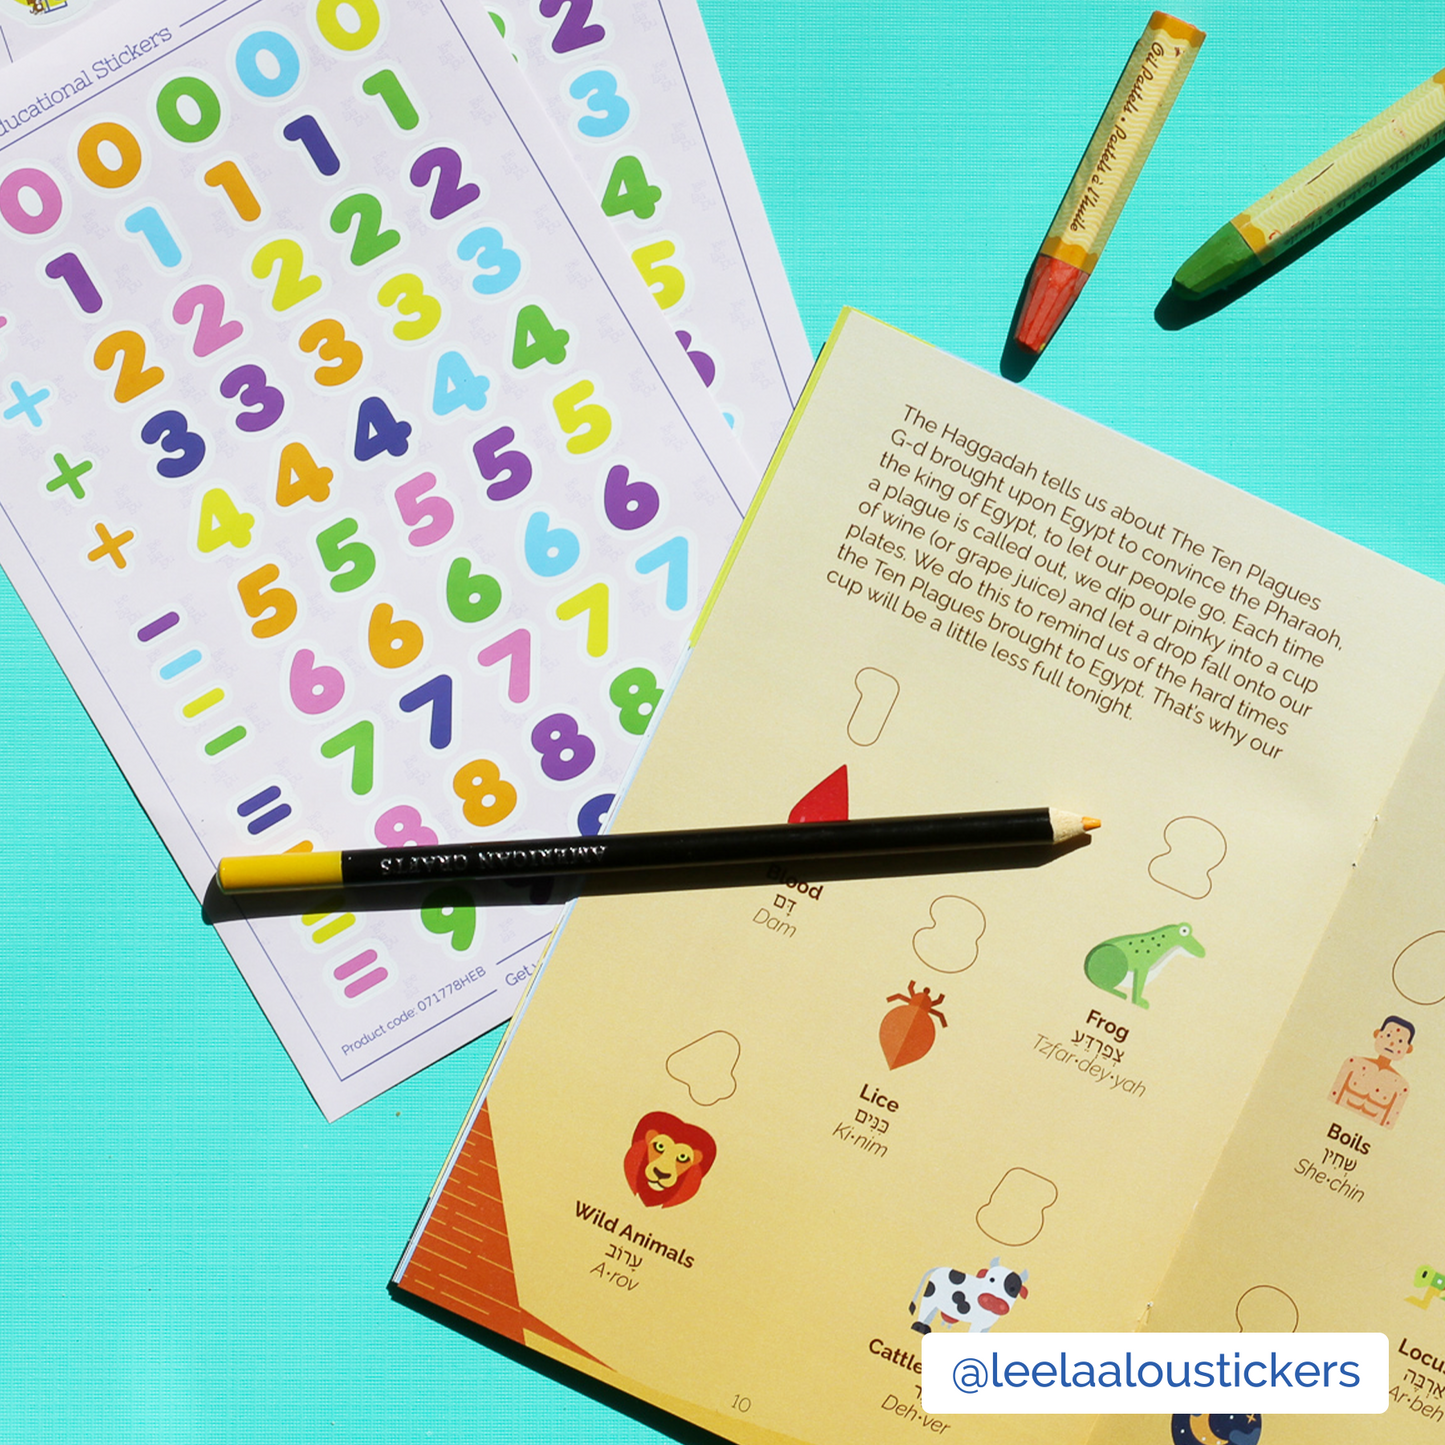 The Passover Haggadah Companion - A sticker activity booklet